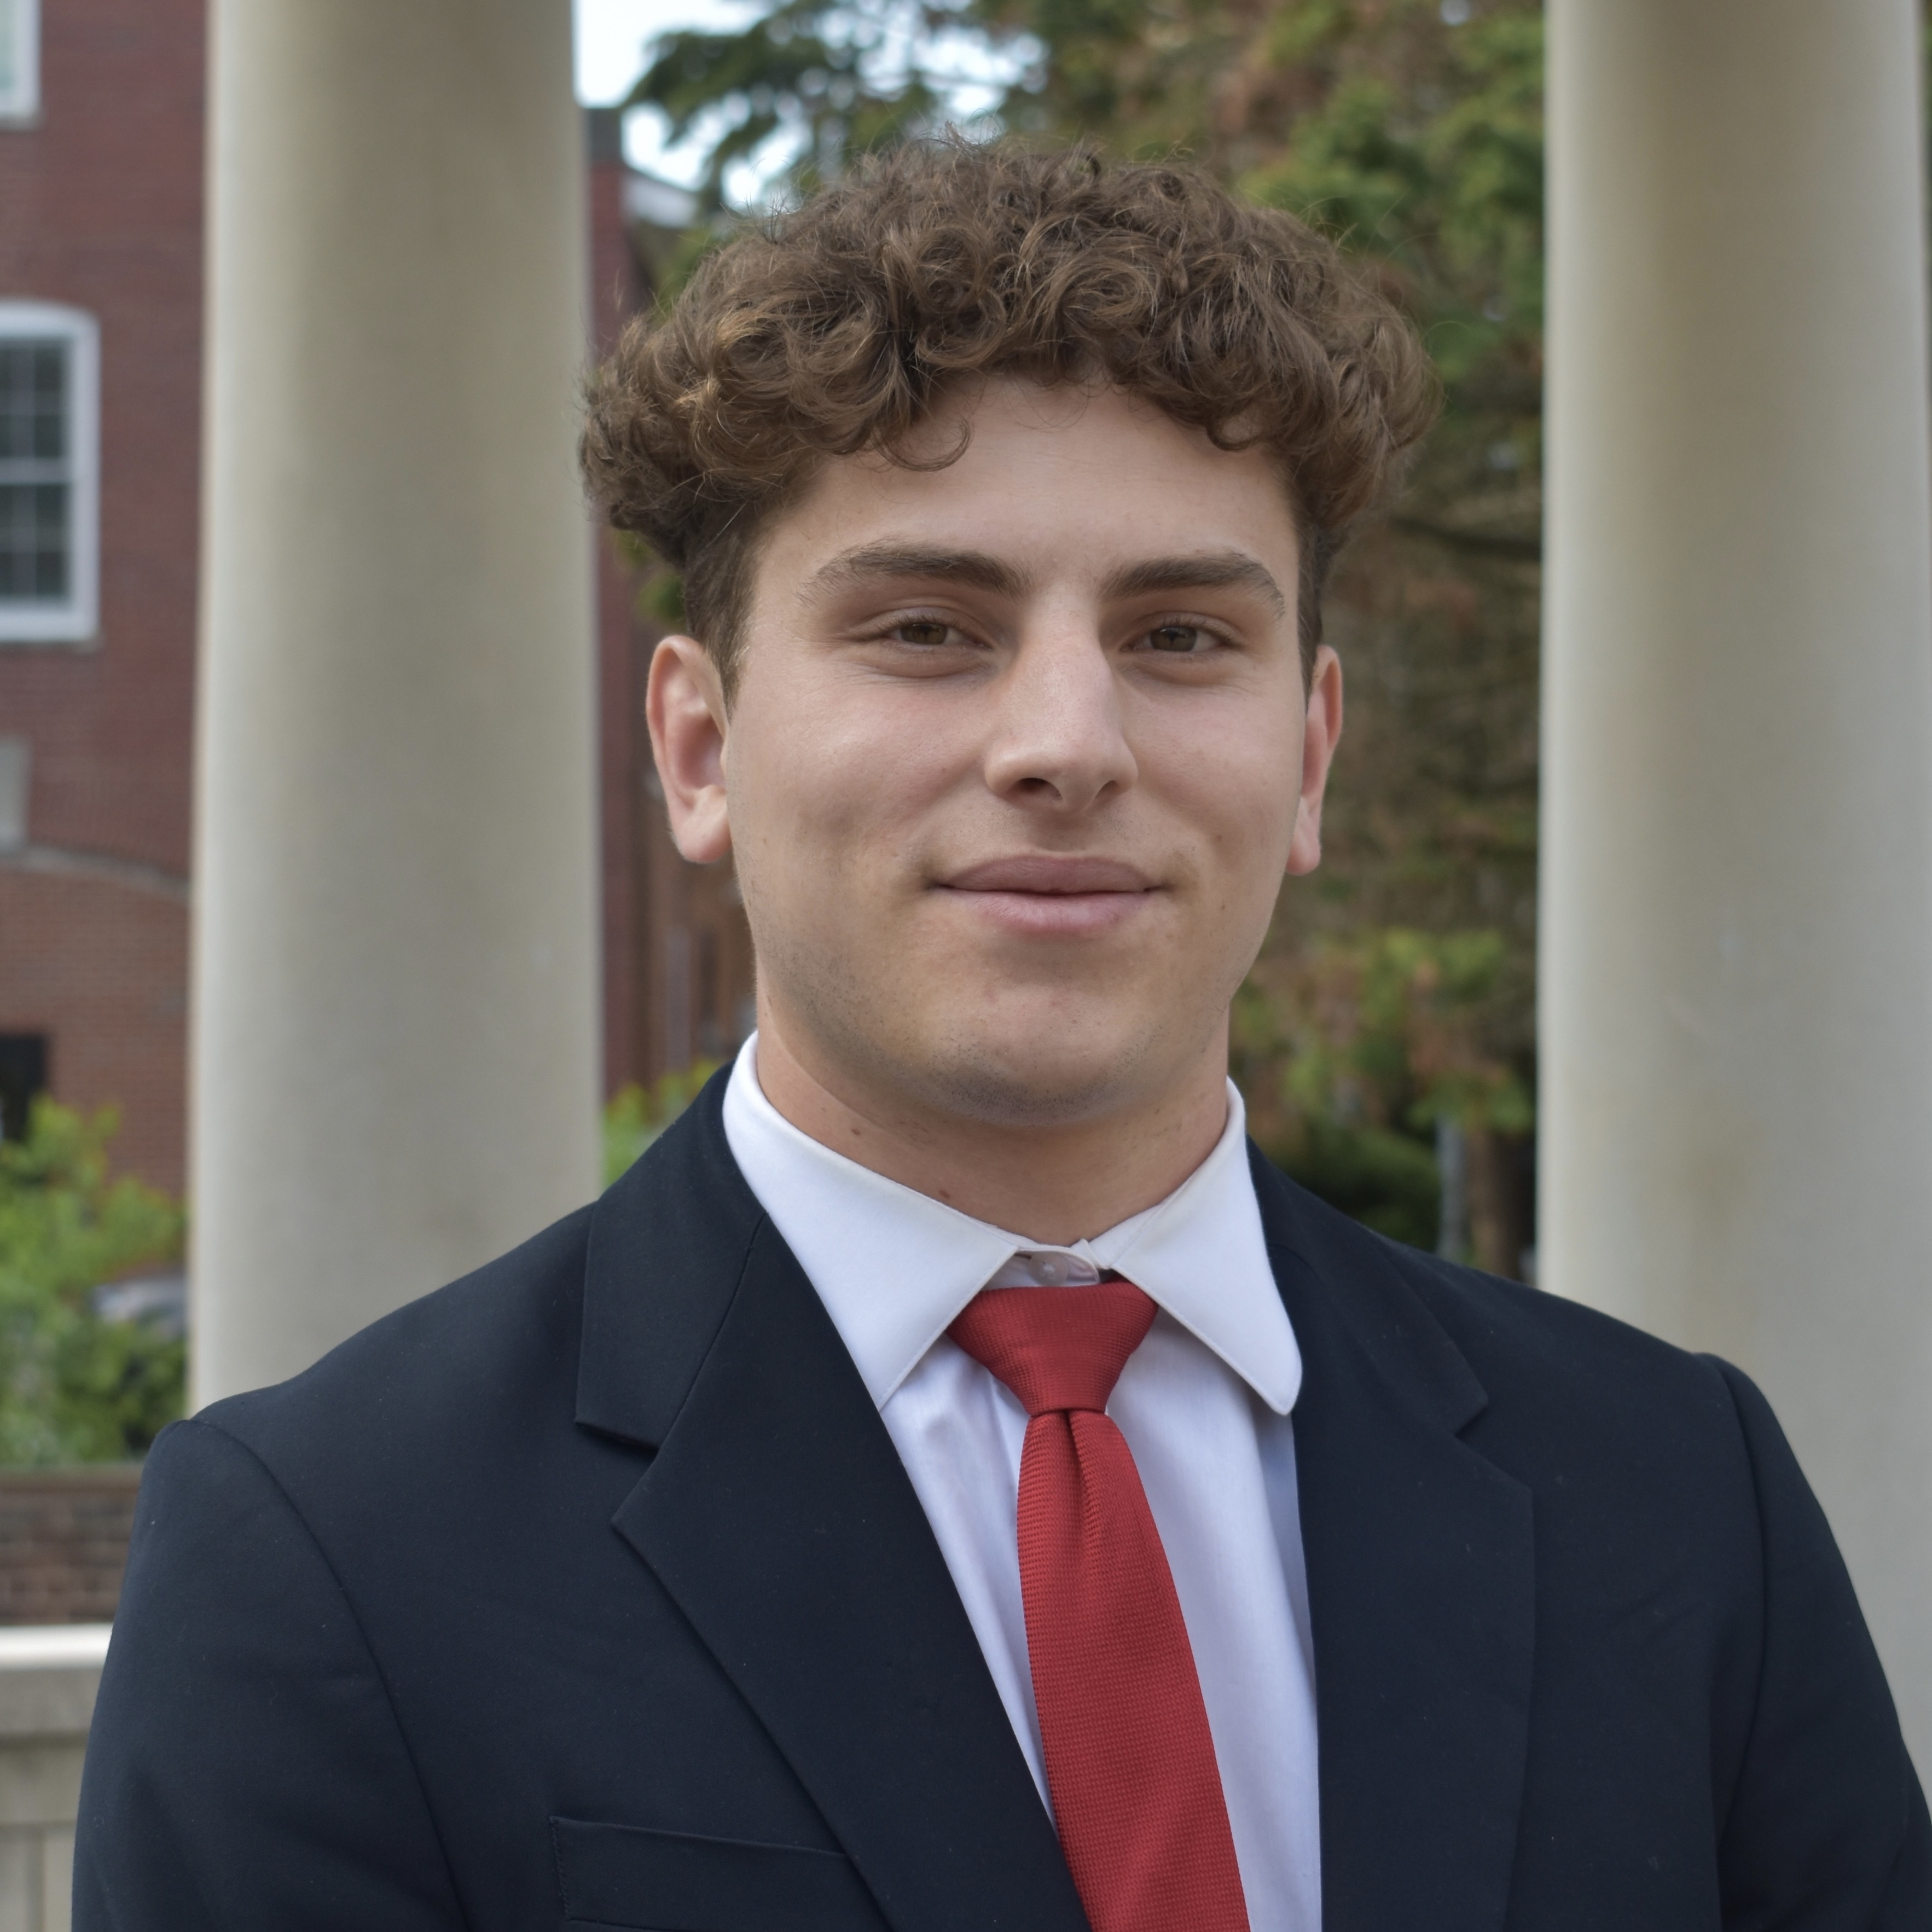 Parviz is a Junior from San Diego,CA. He is pursuing a major in International Business and Finance. Parviz joined the initiative in September 2023.